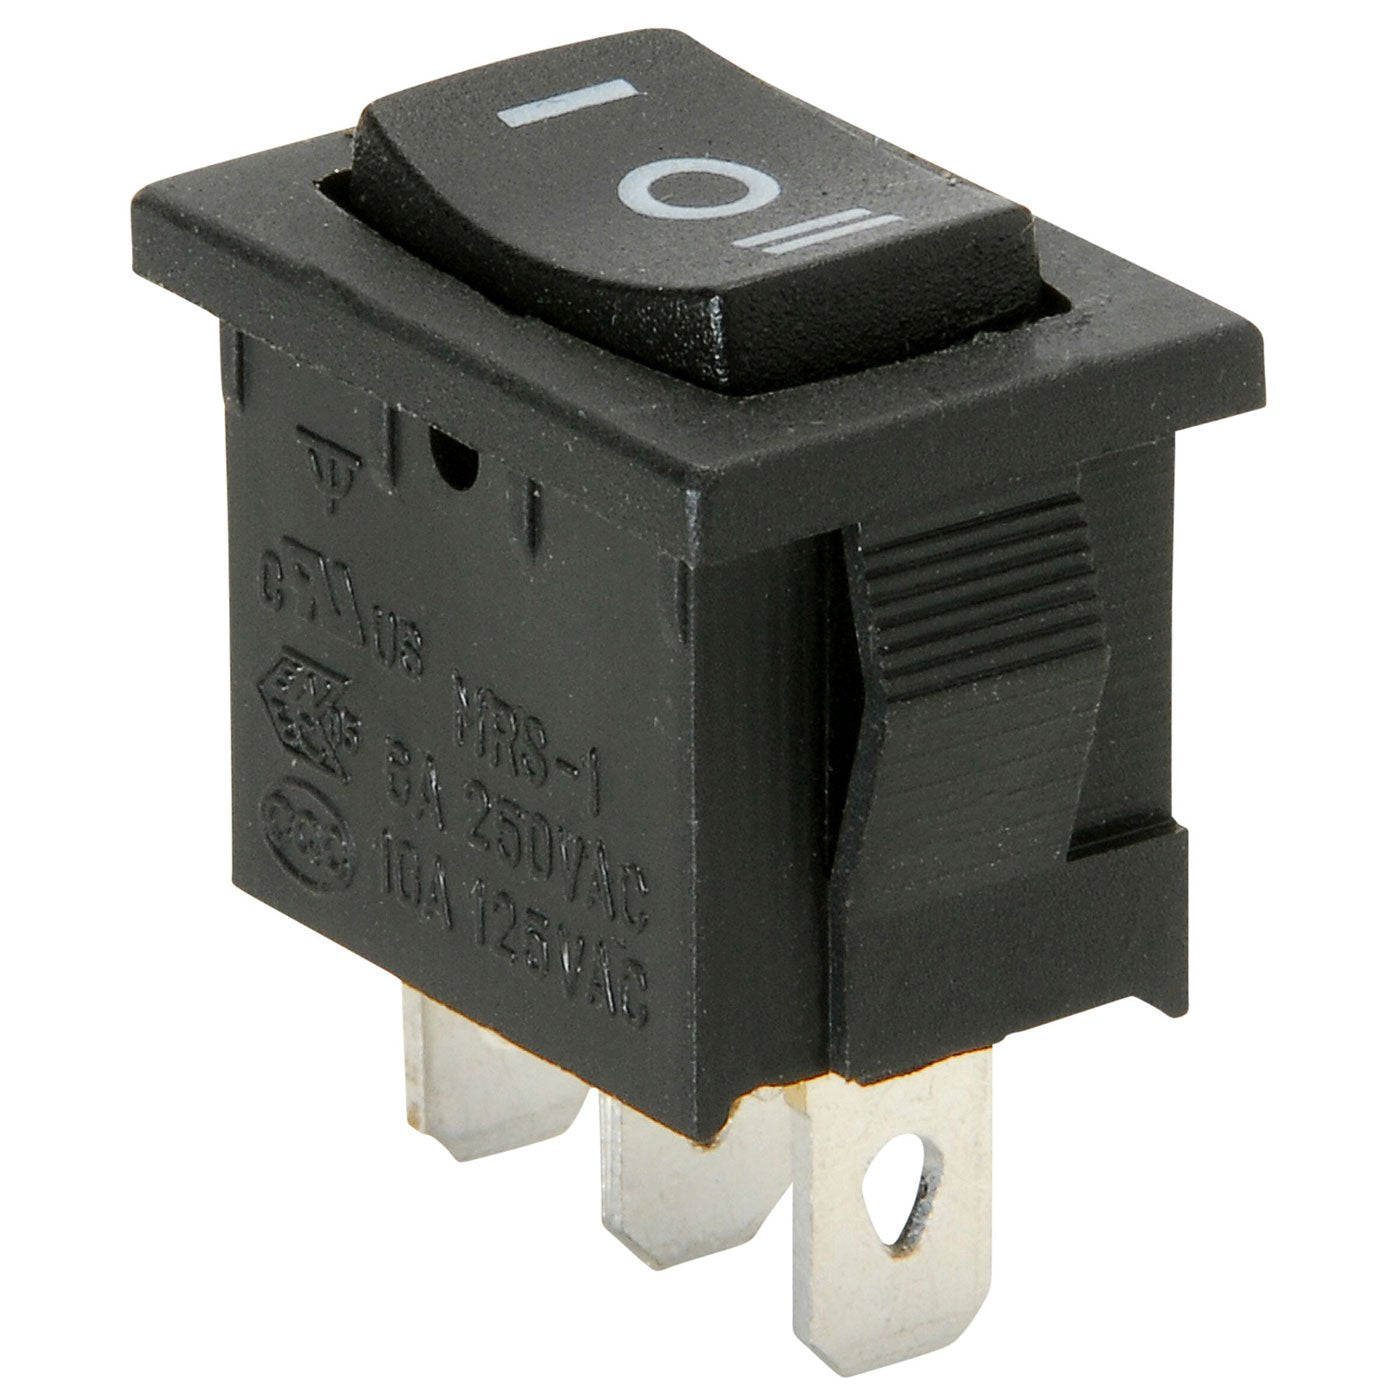 Single - Parts Express Rocker (Momentary) Switch Center Off